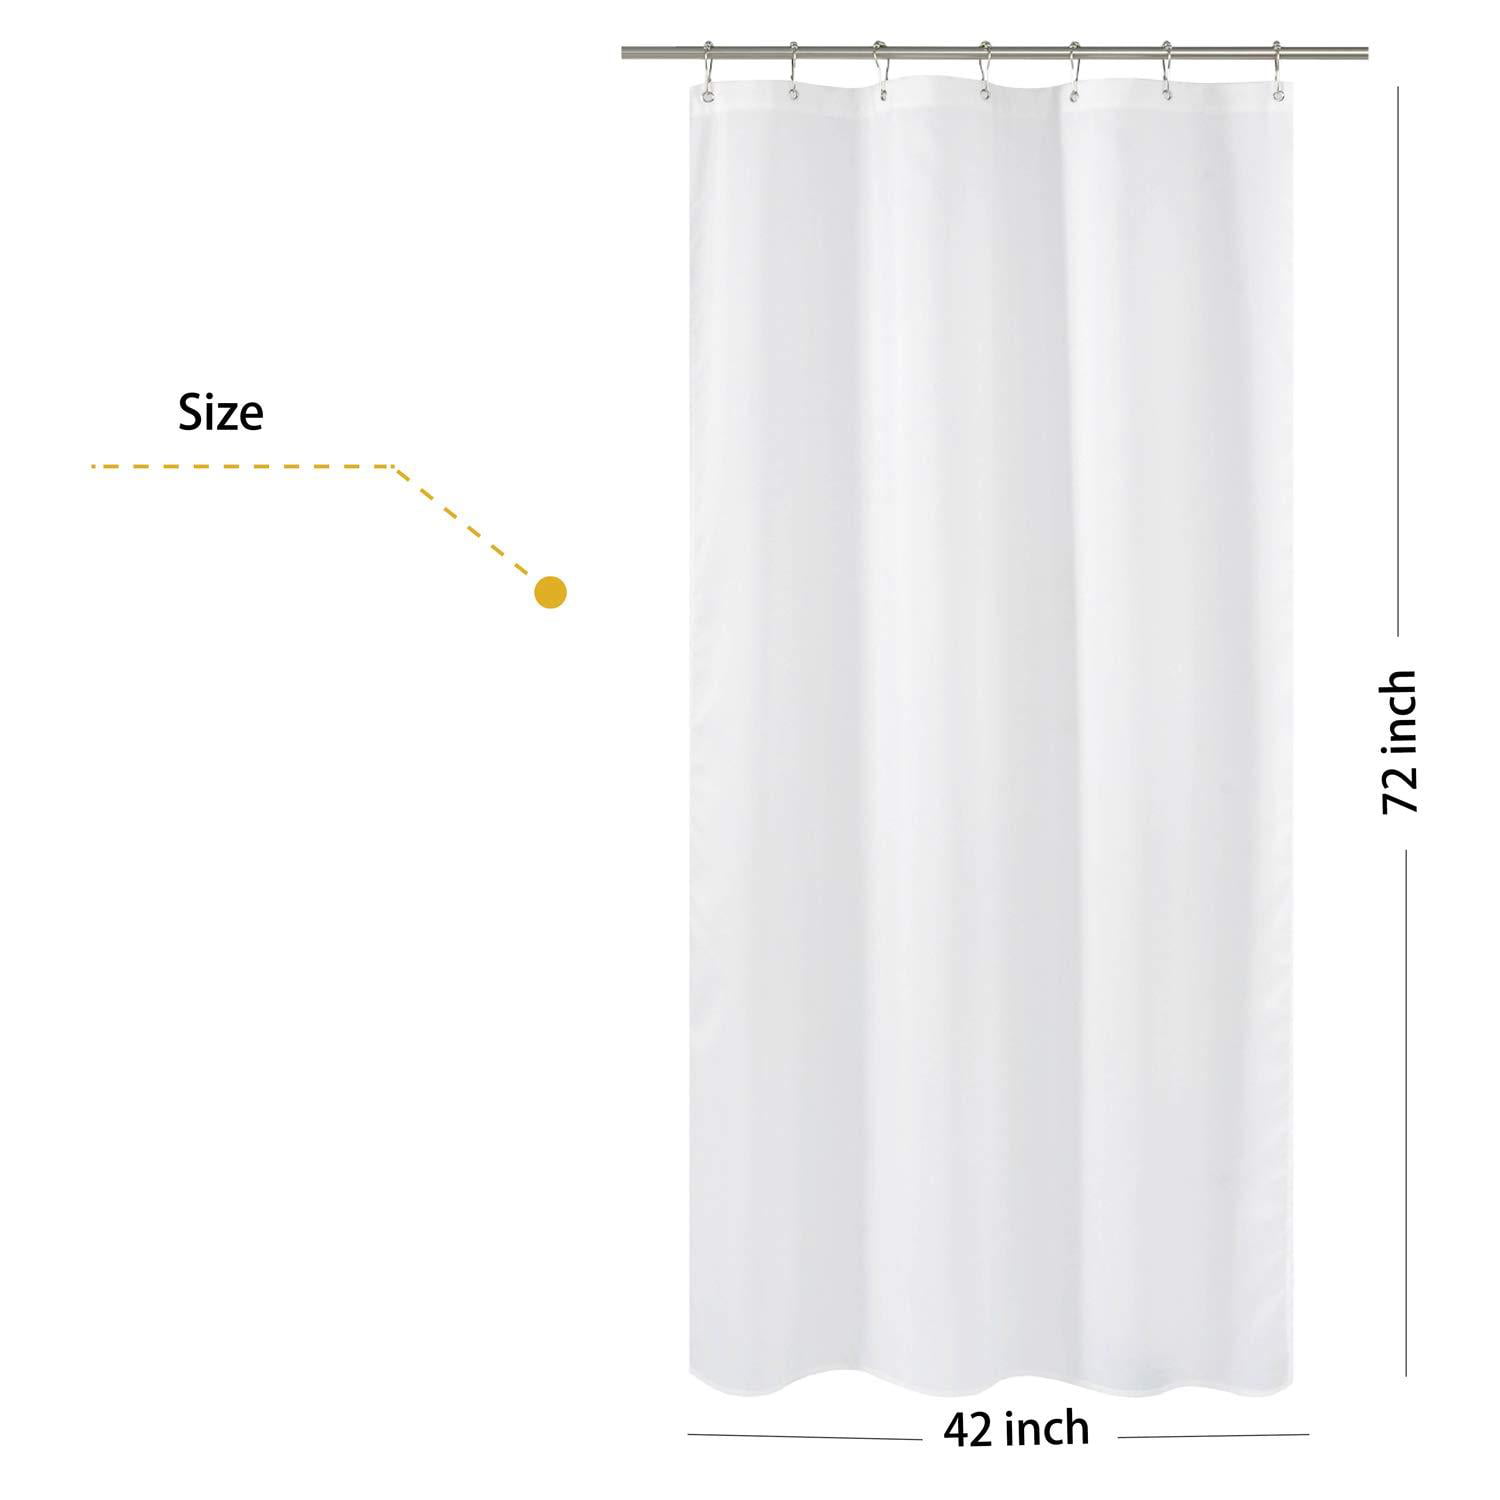 Fabric Shower Curtain Liner Stall Size, What Are The Dimensions Of Shower Curtains